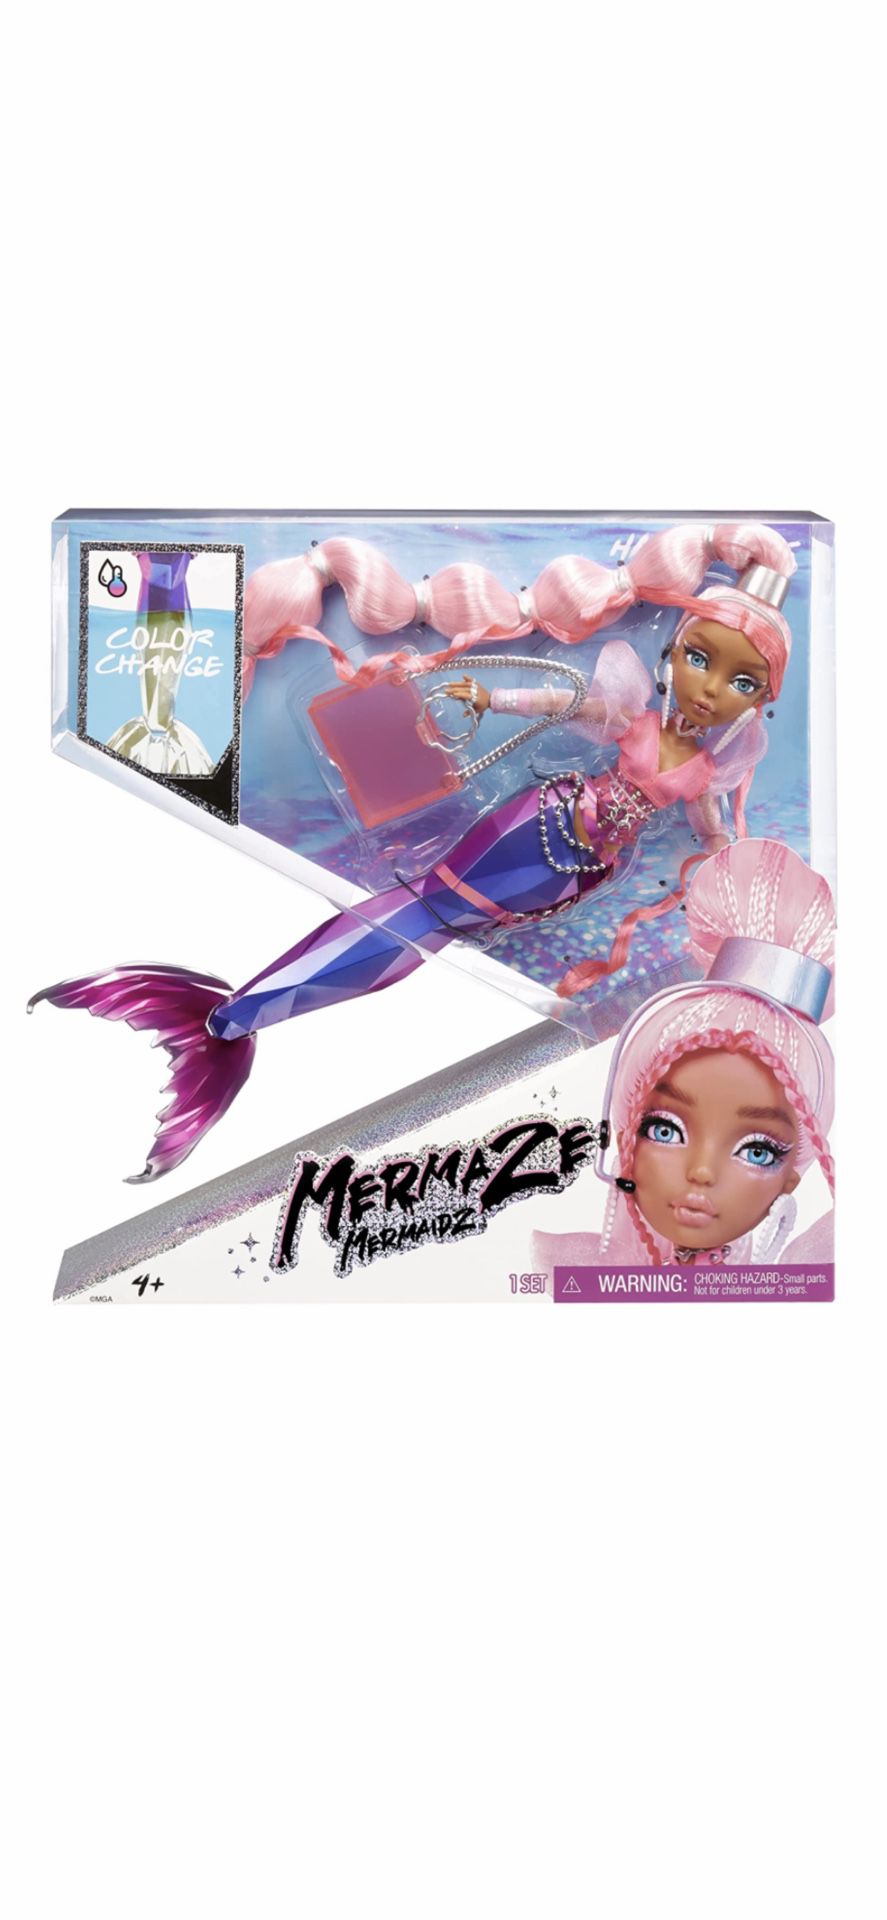 MERMAZE MERMAIDZ Color Change Harmonique Mermaid Fashion Doll with Designer Outfit & Accessories, Stylish Hair & Sculpted Tail, 